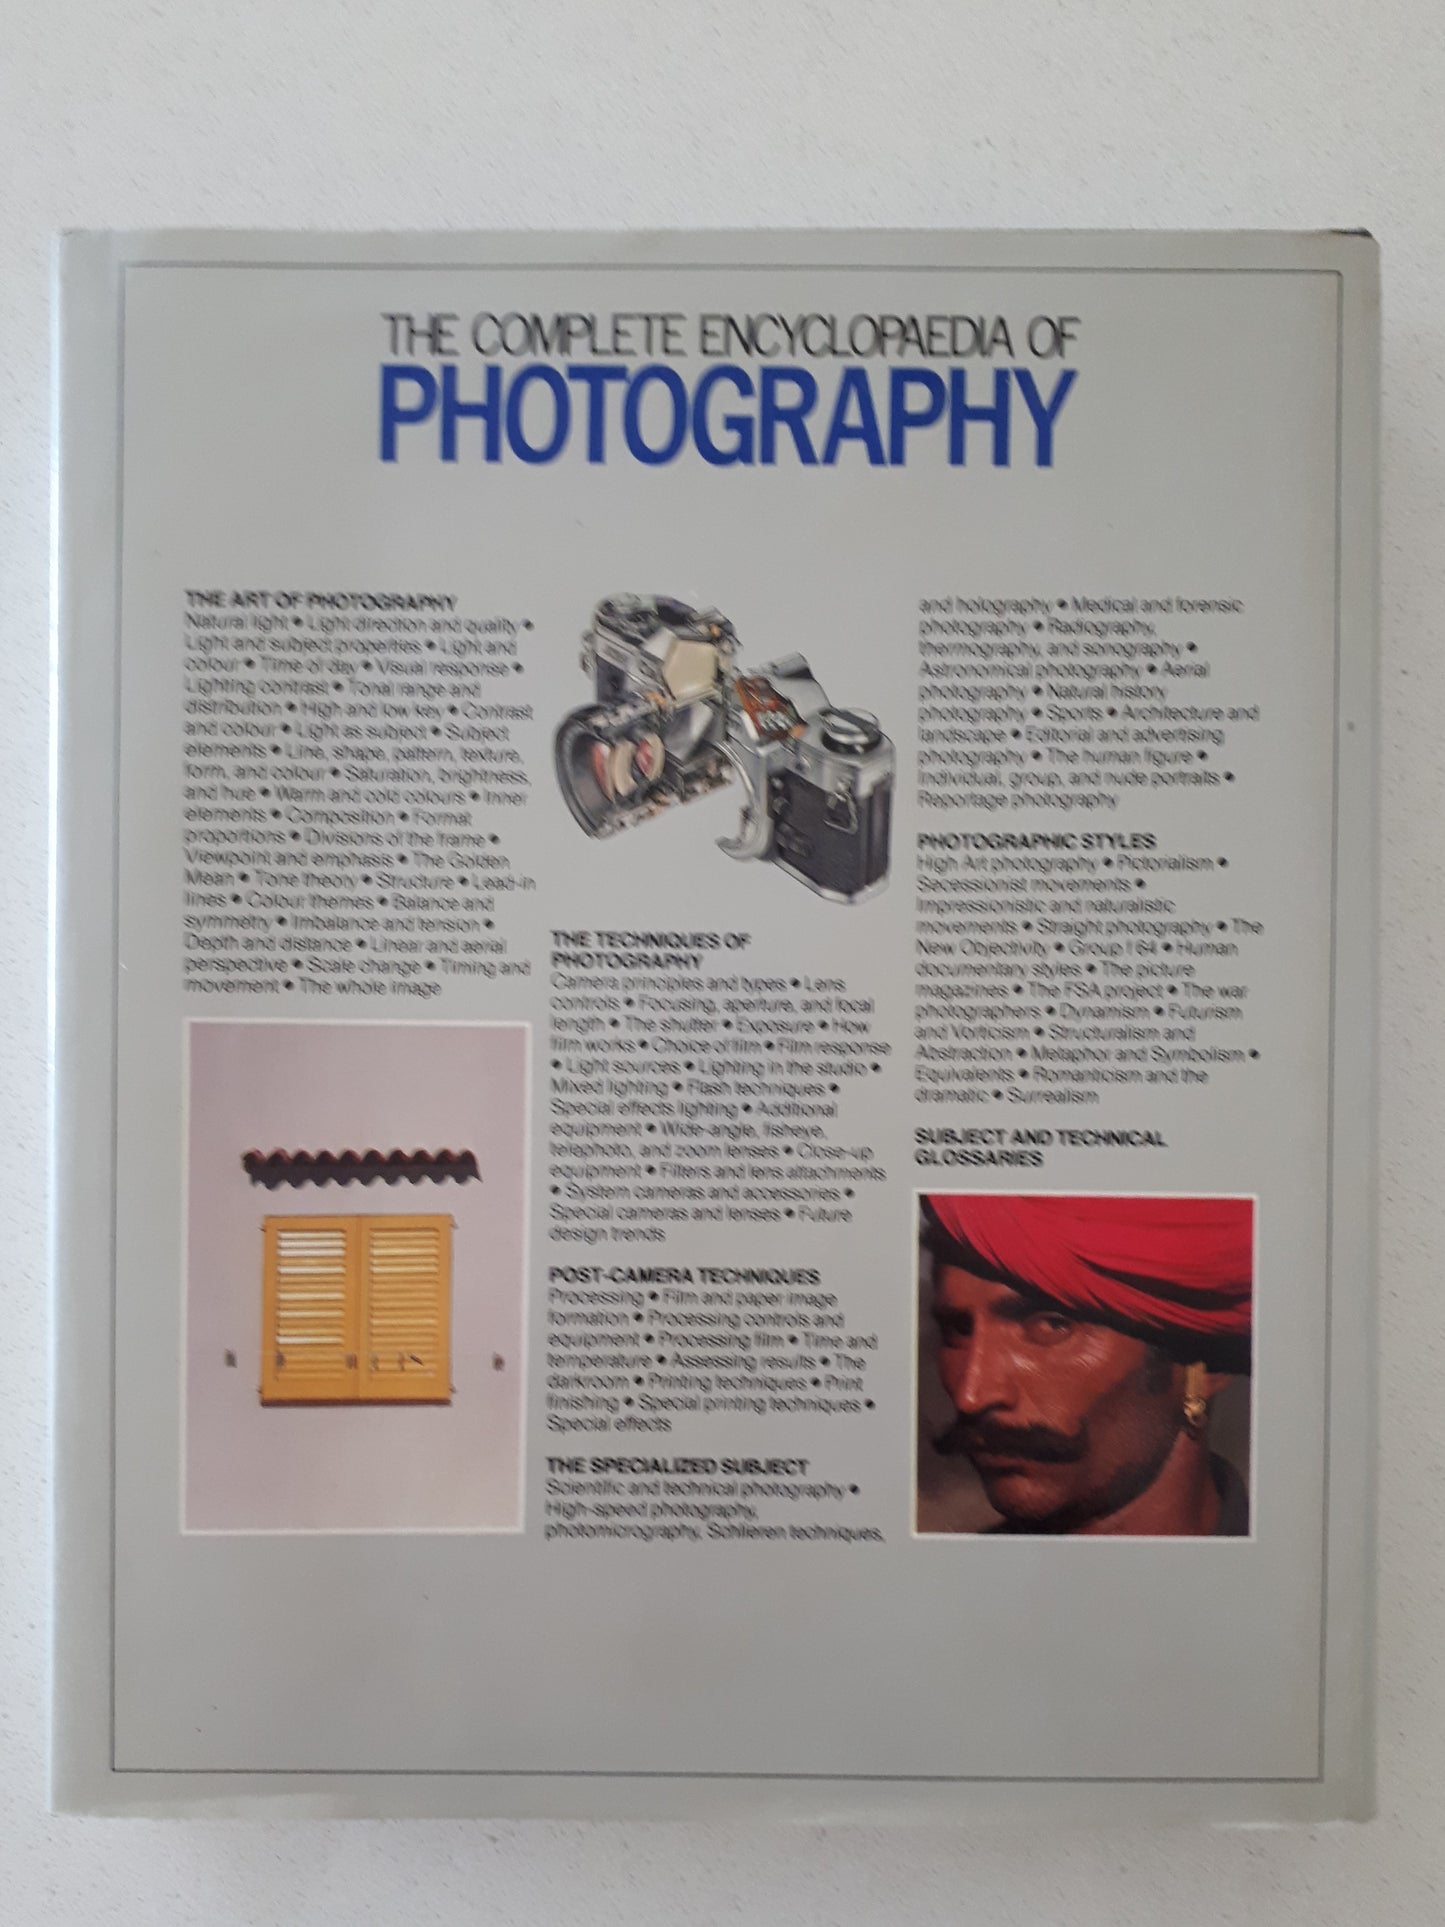 The Complete Encyclopaedia of Photography by Michael Langford